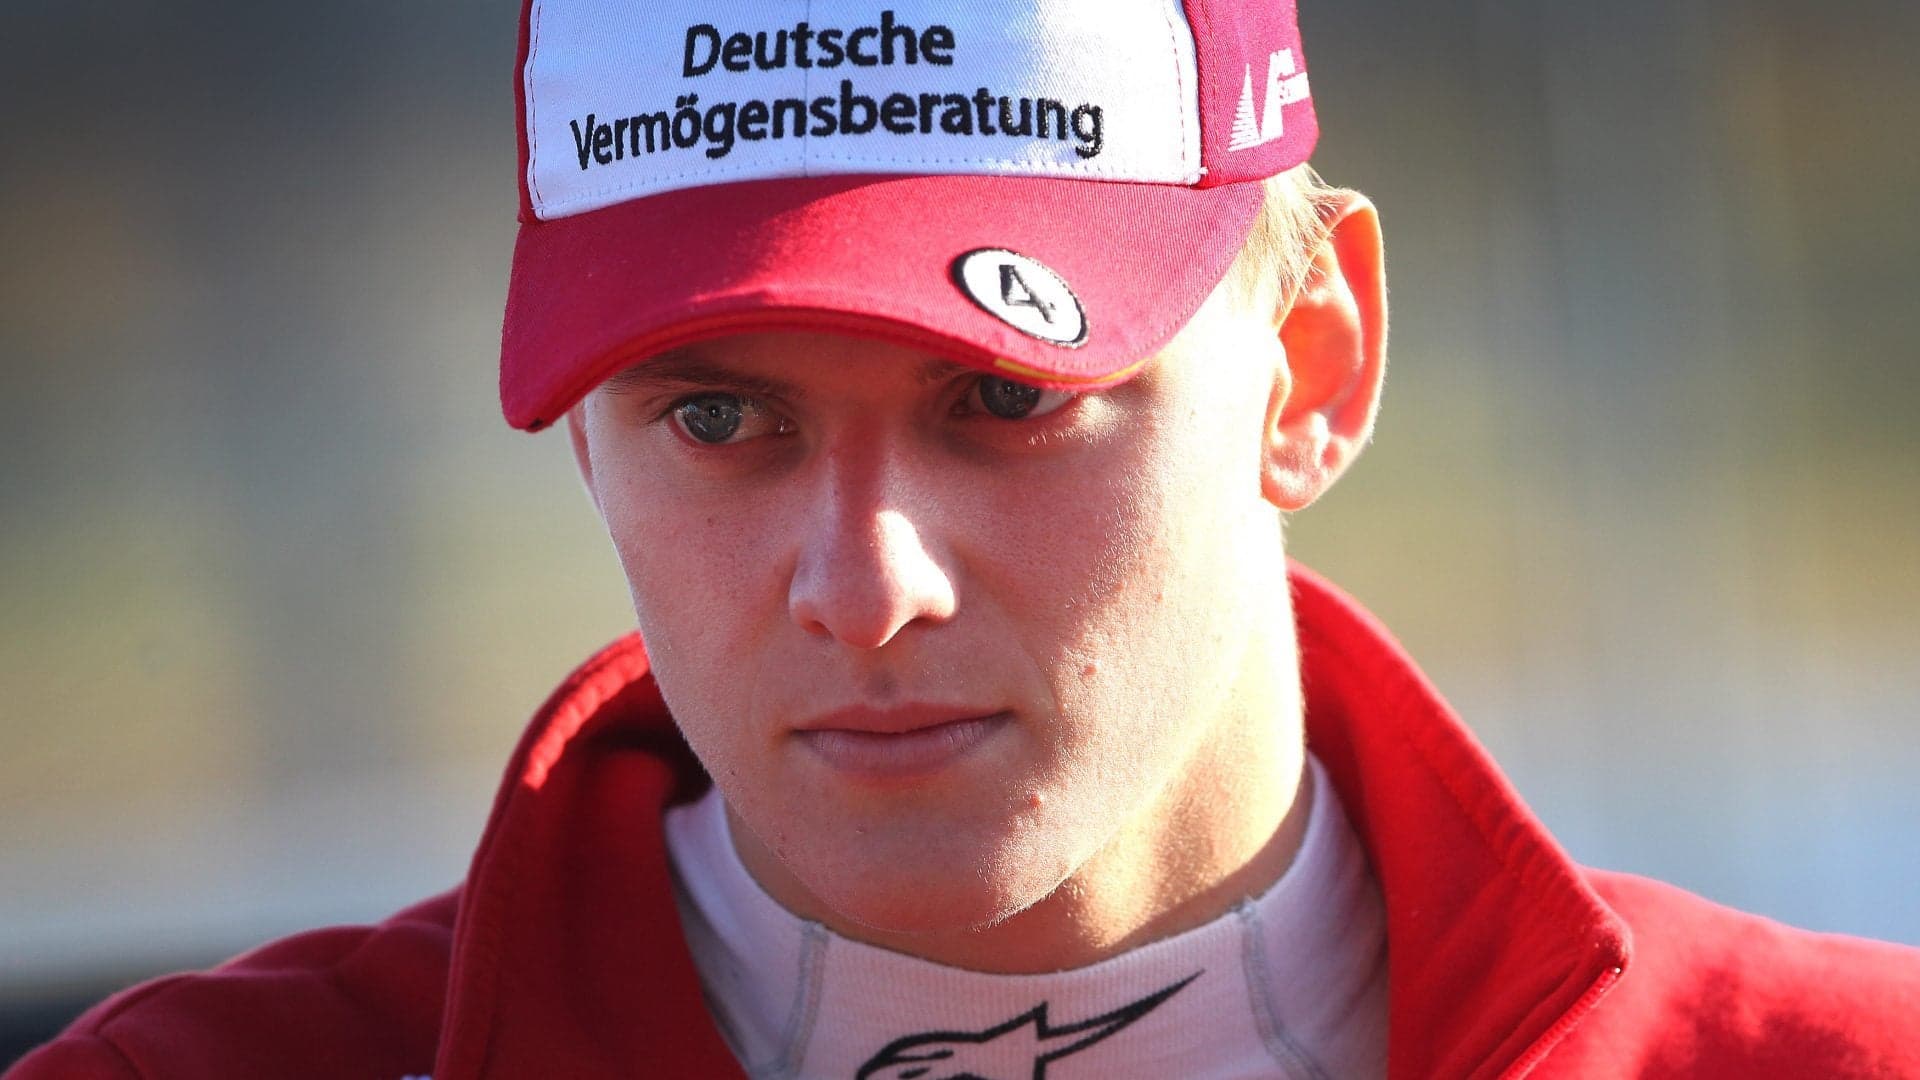 Mick Schumacher Reportedly Close to Signing With Ferrari